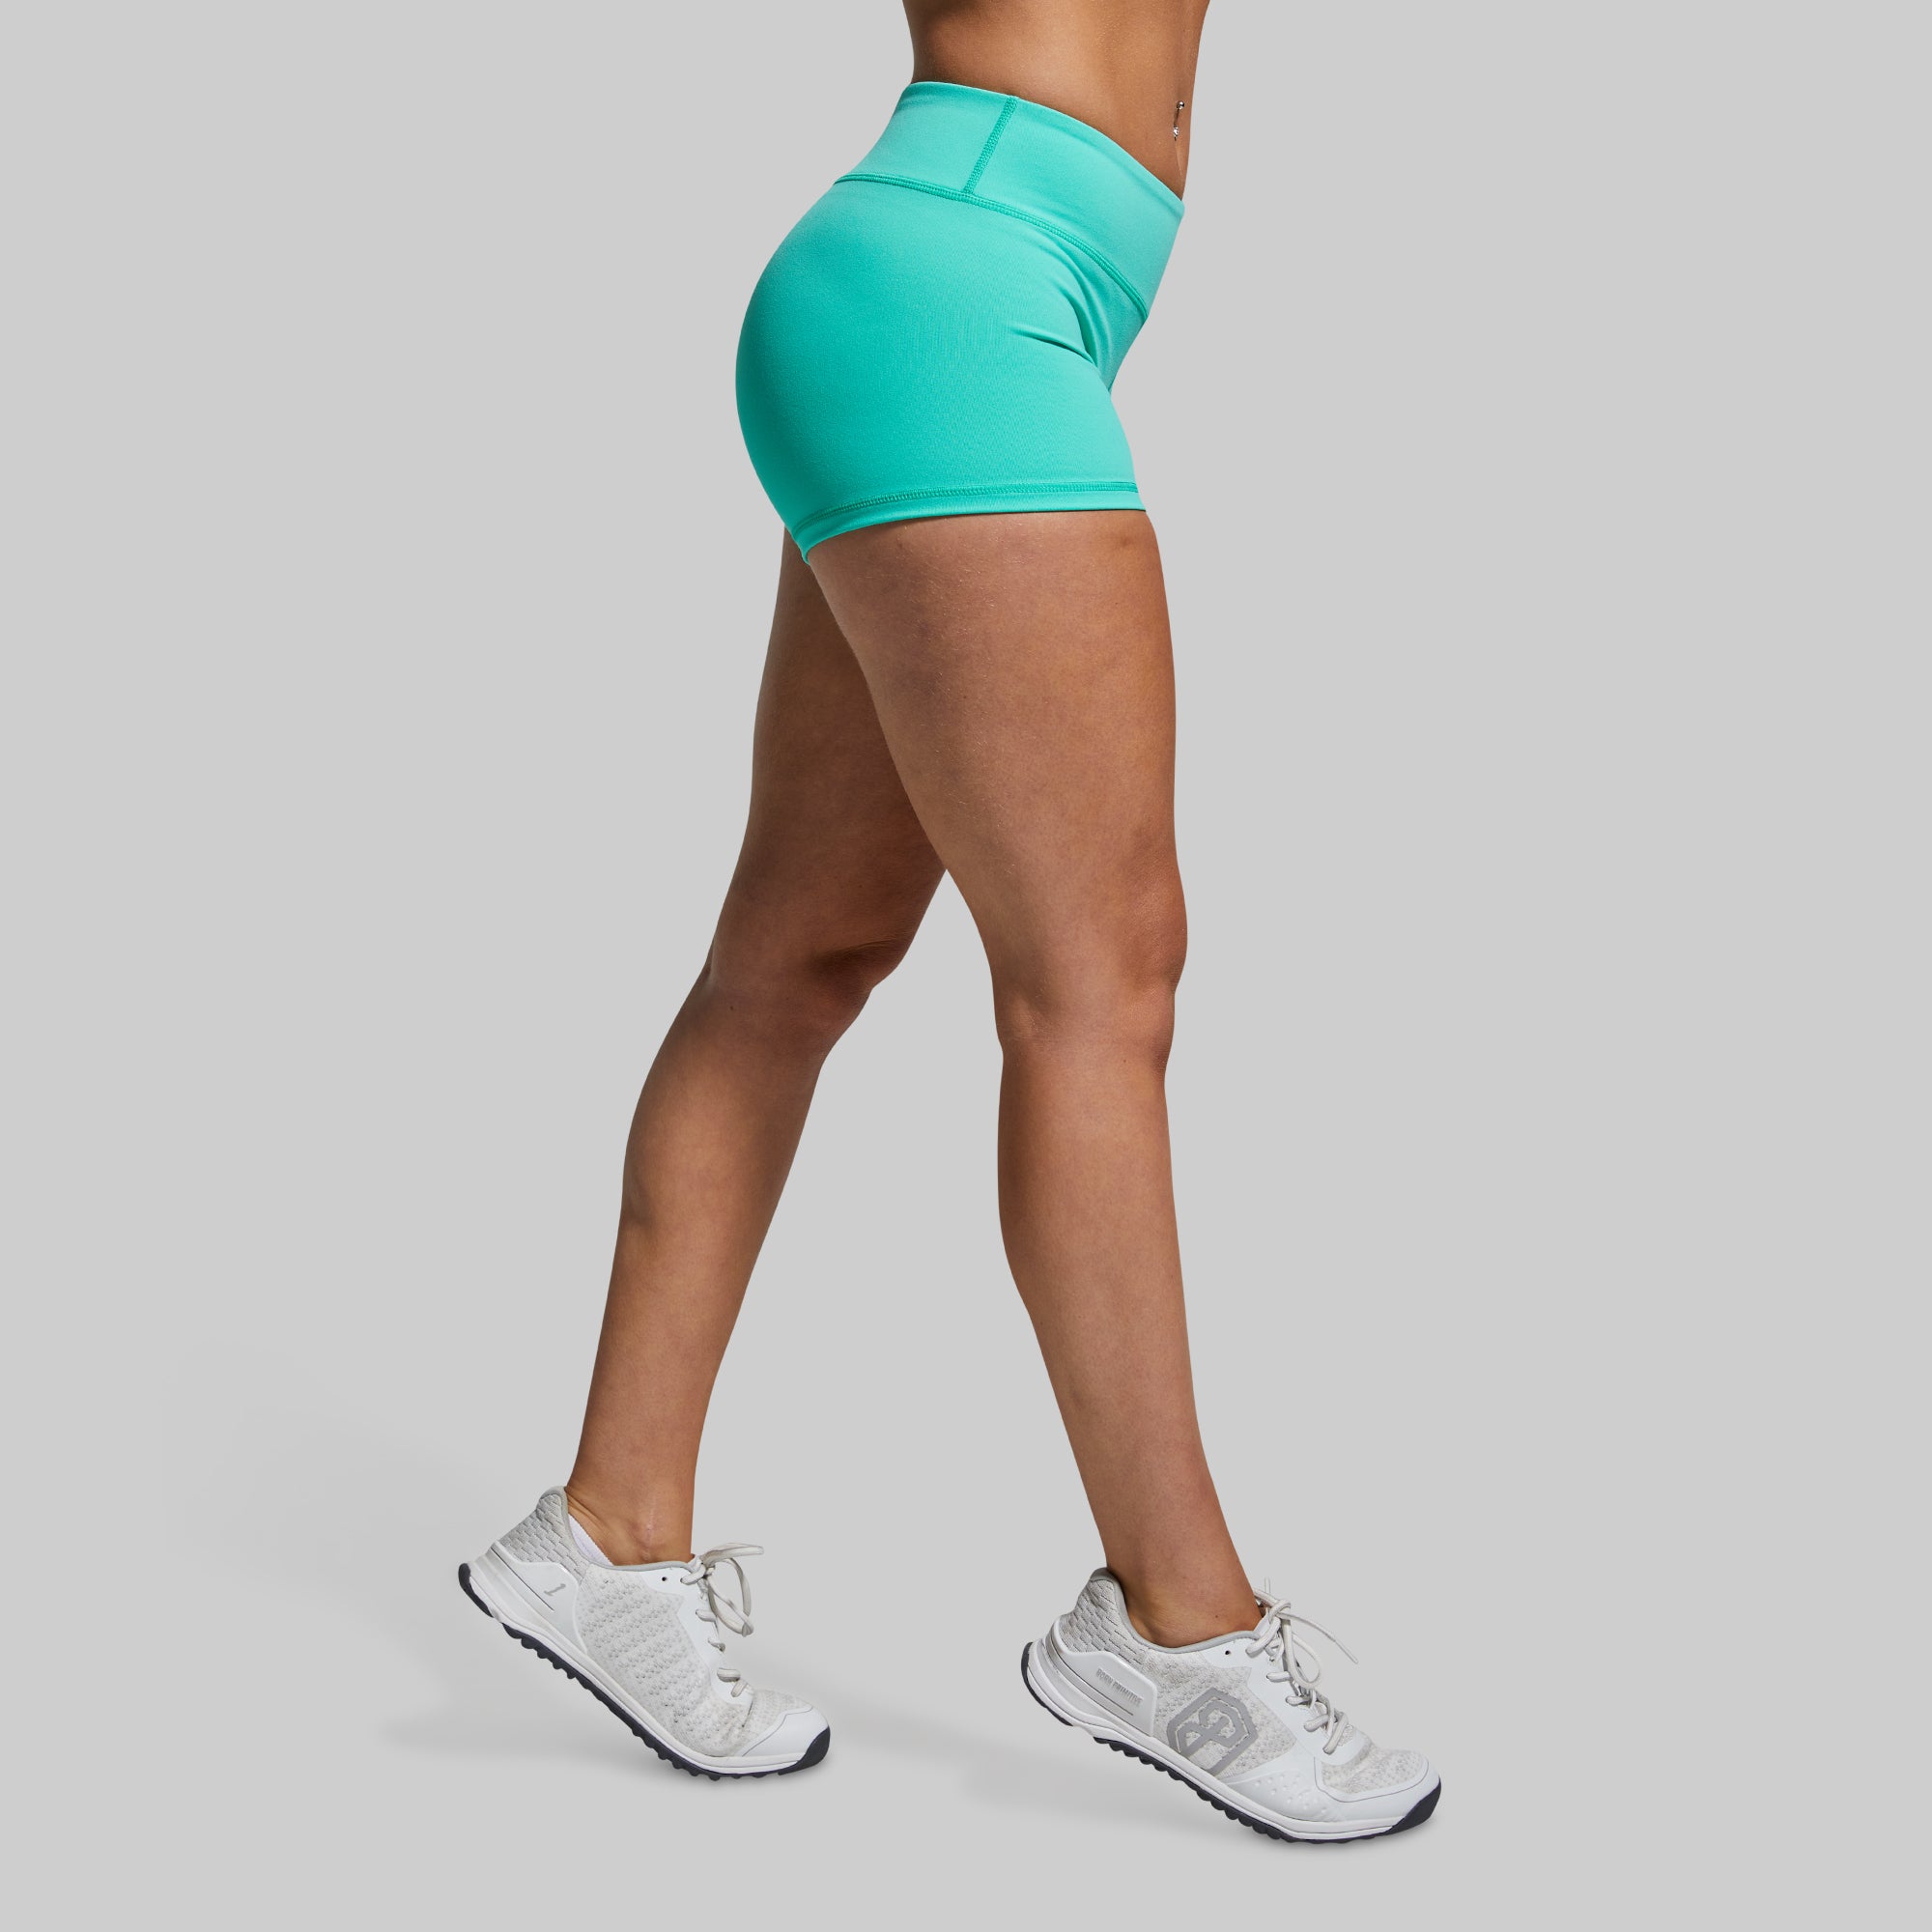 Women's Teal Compression Shorts  Athletic Booty Shorts – Born